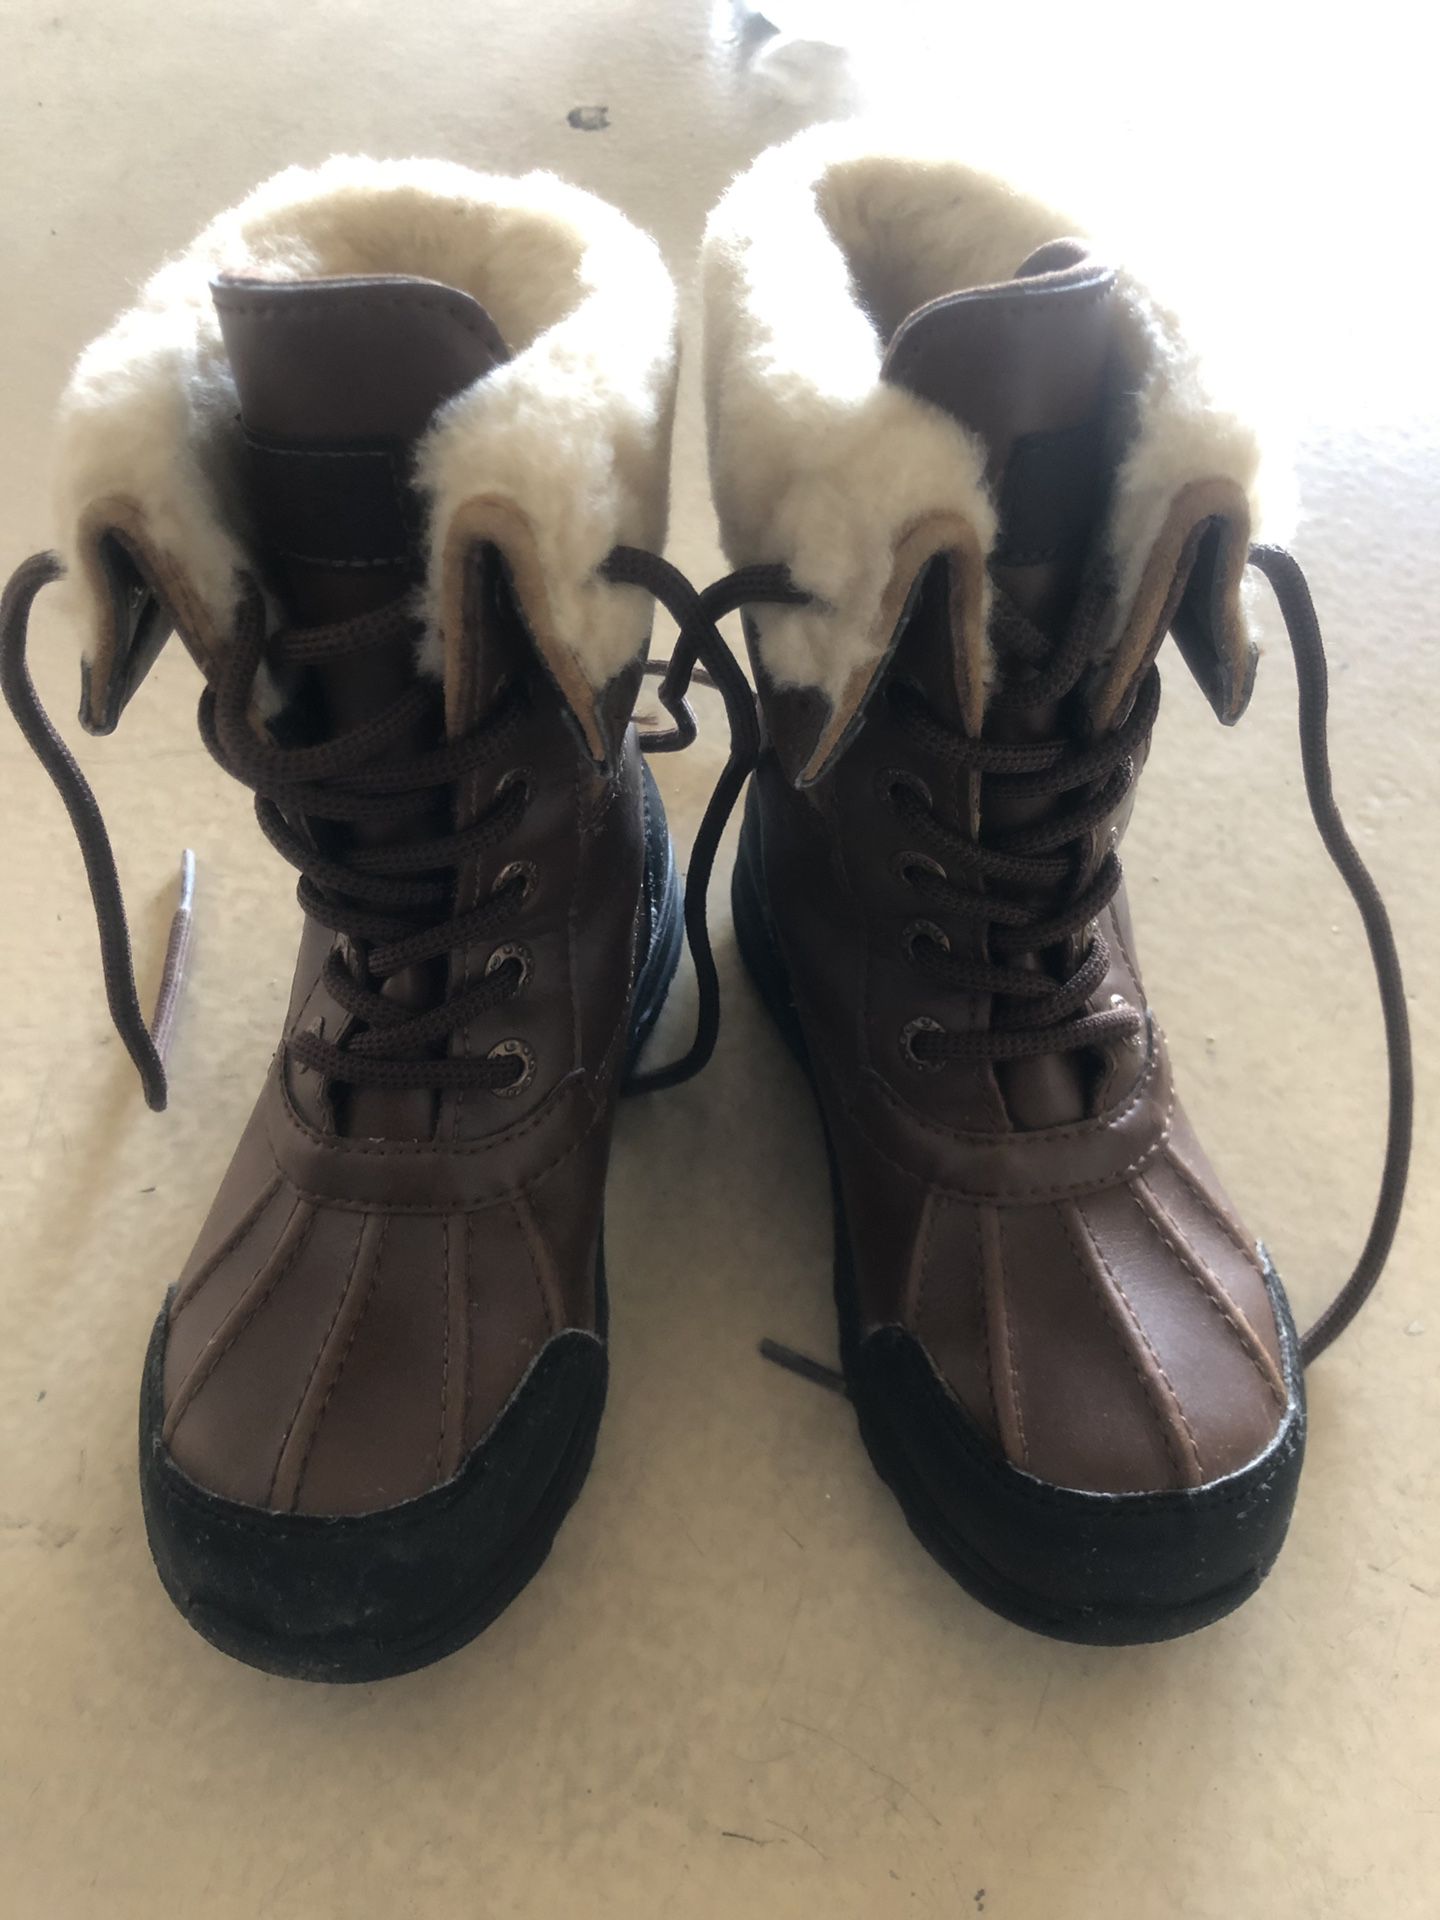 Kids UGG snow boots size 13